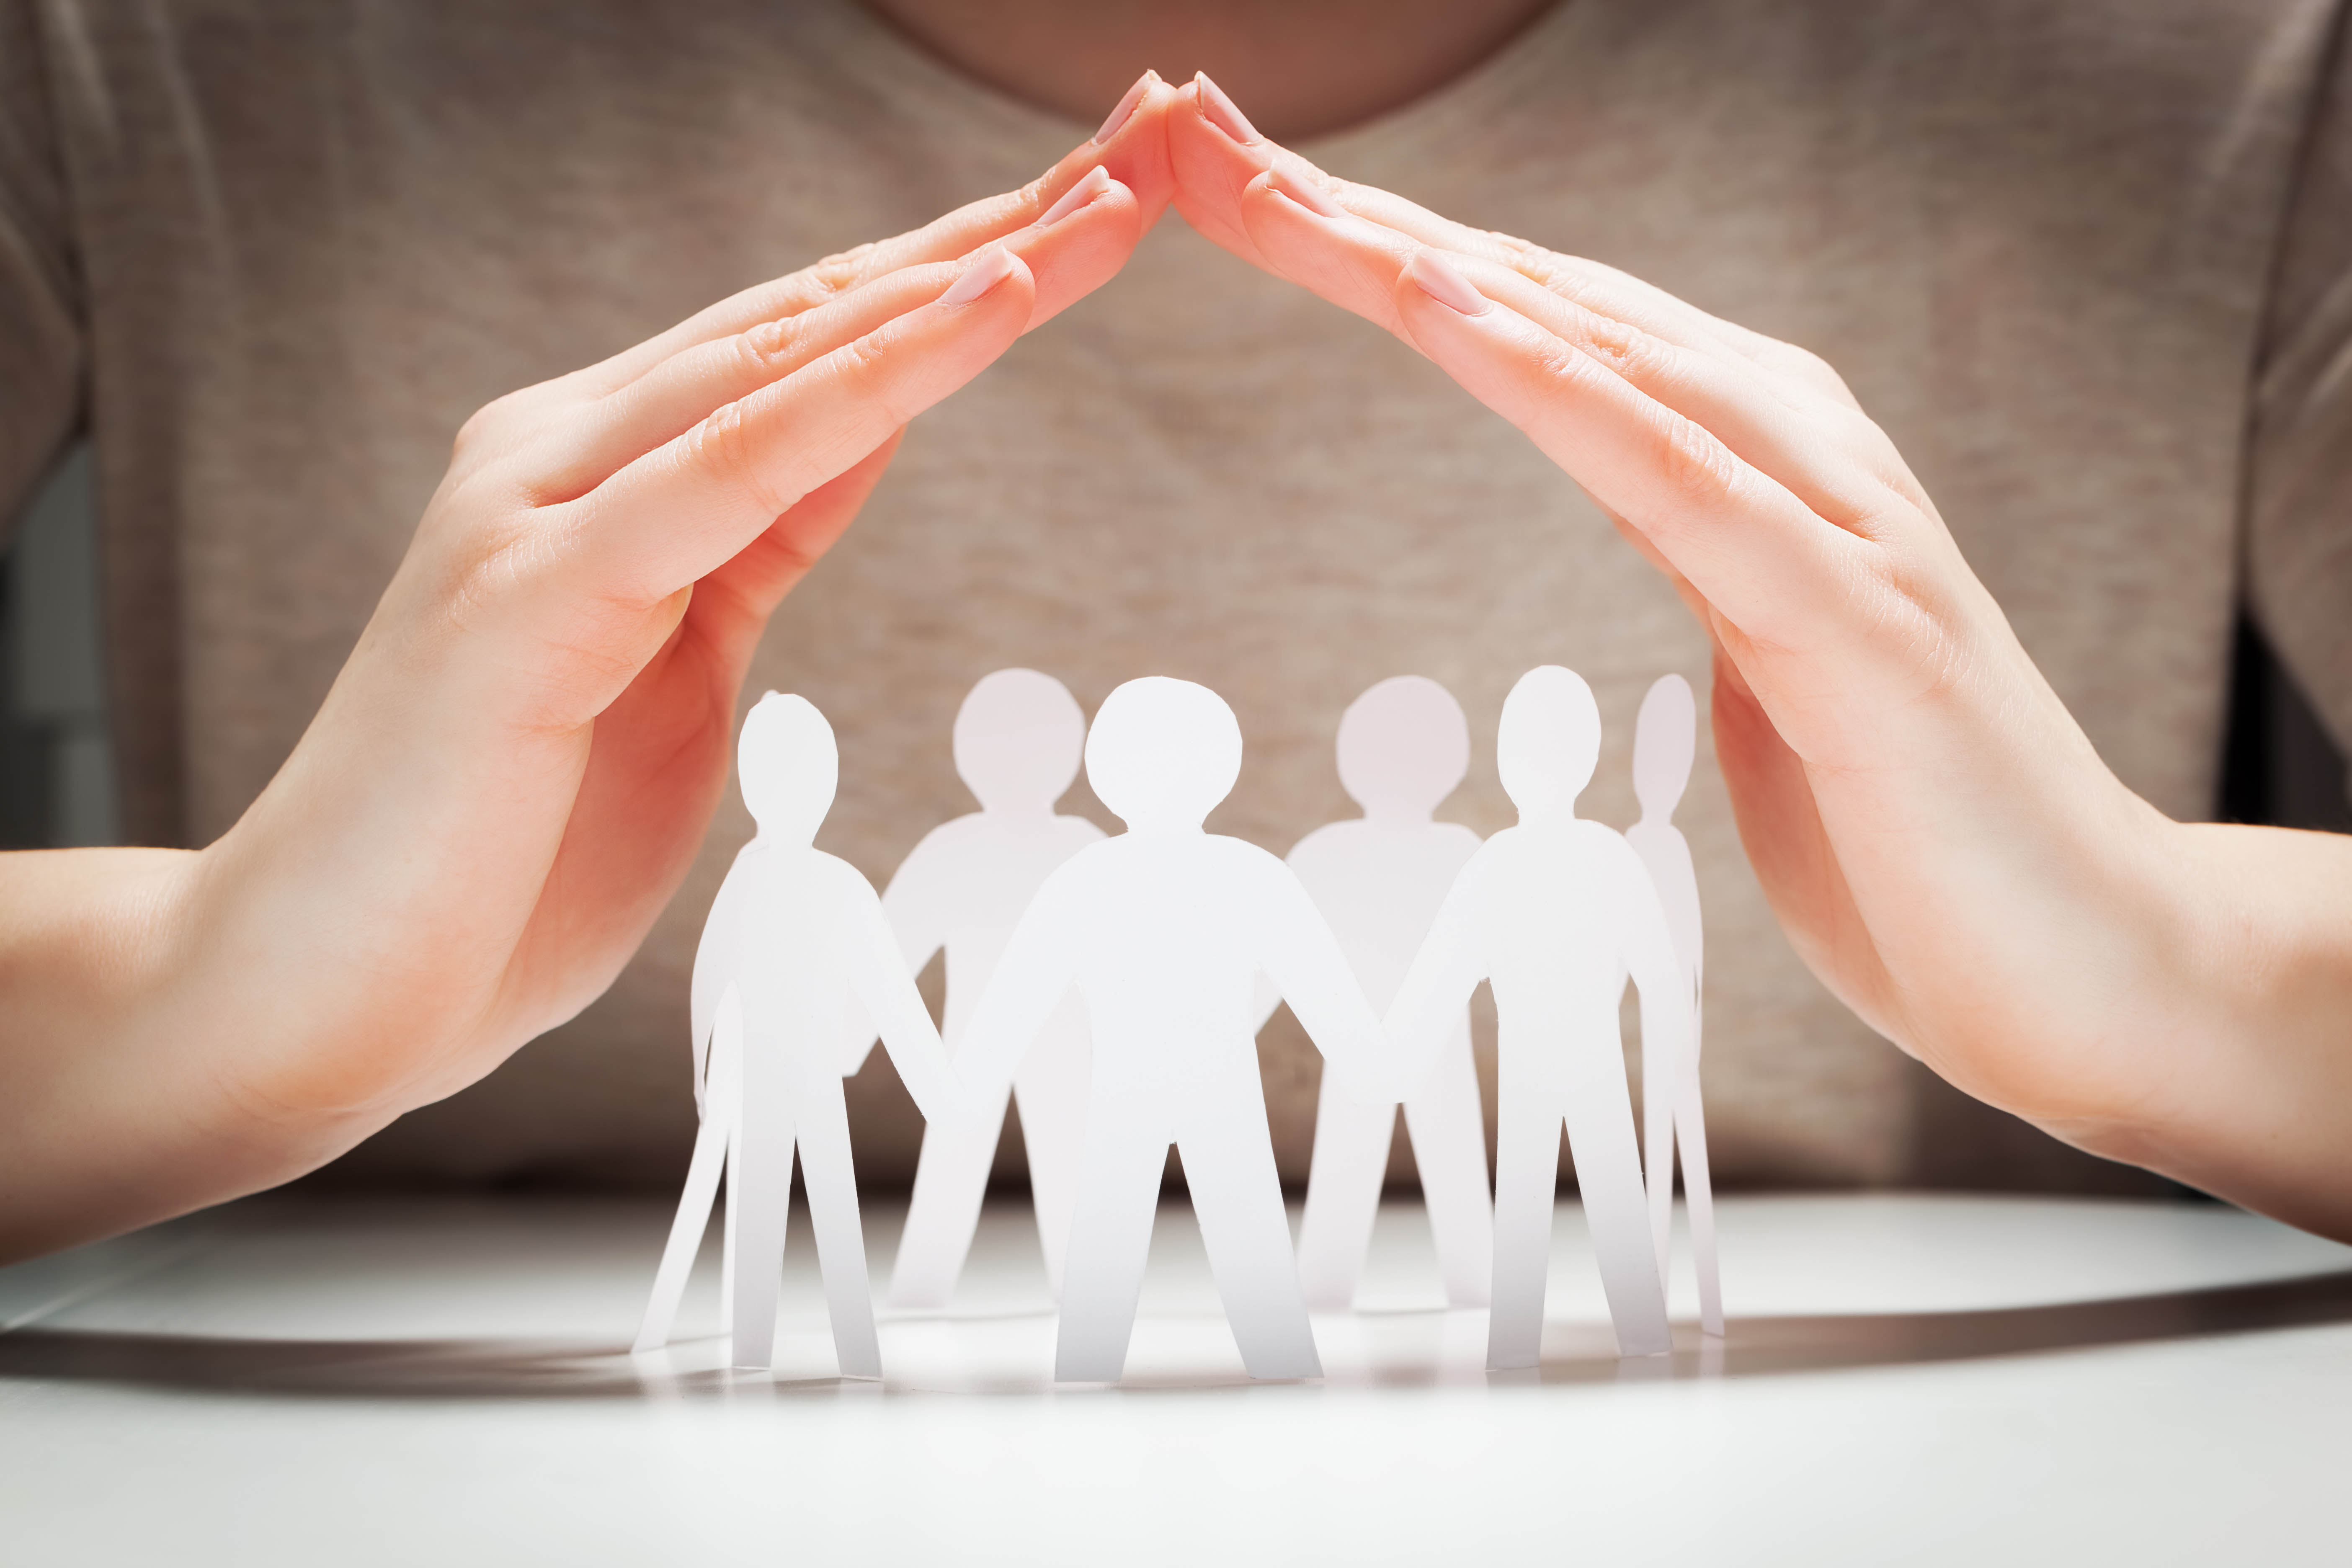 Person holding their hands, clasped, over top of a family of paper people